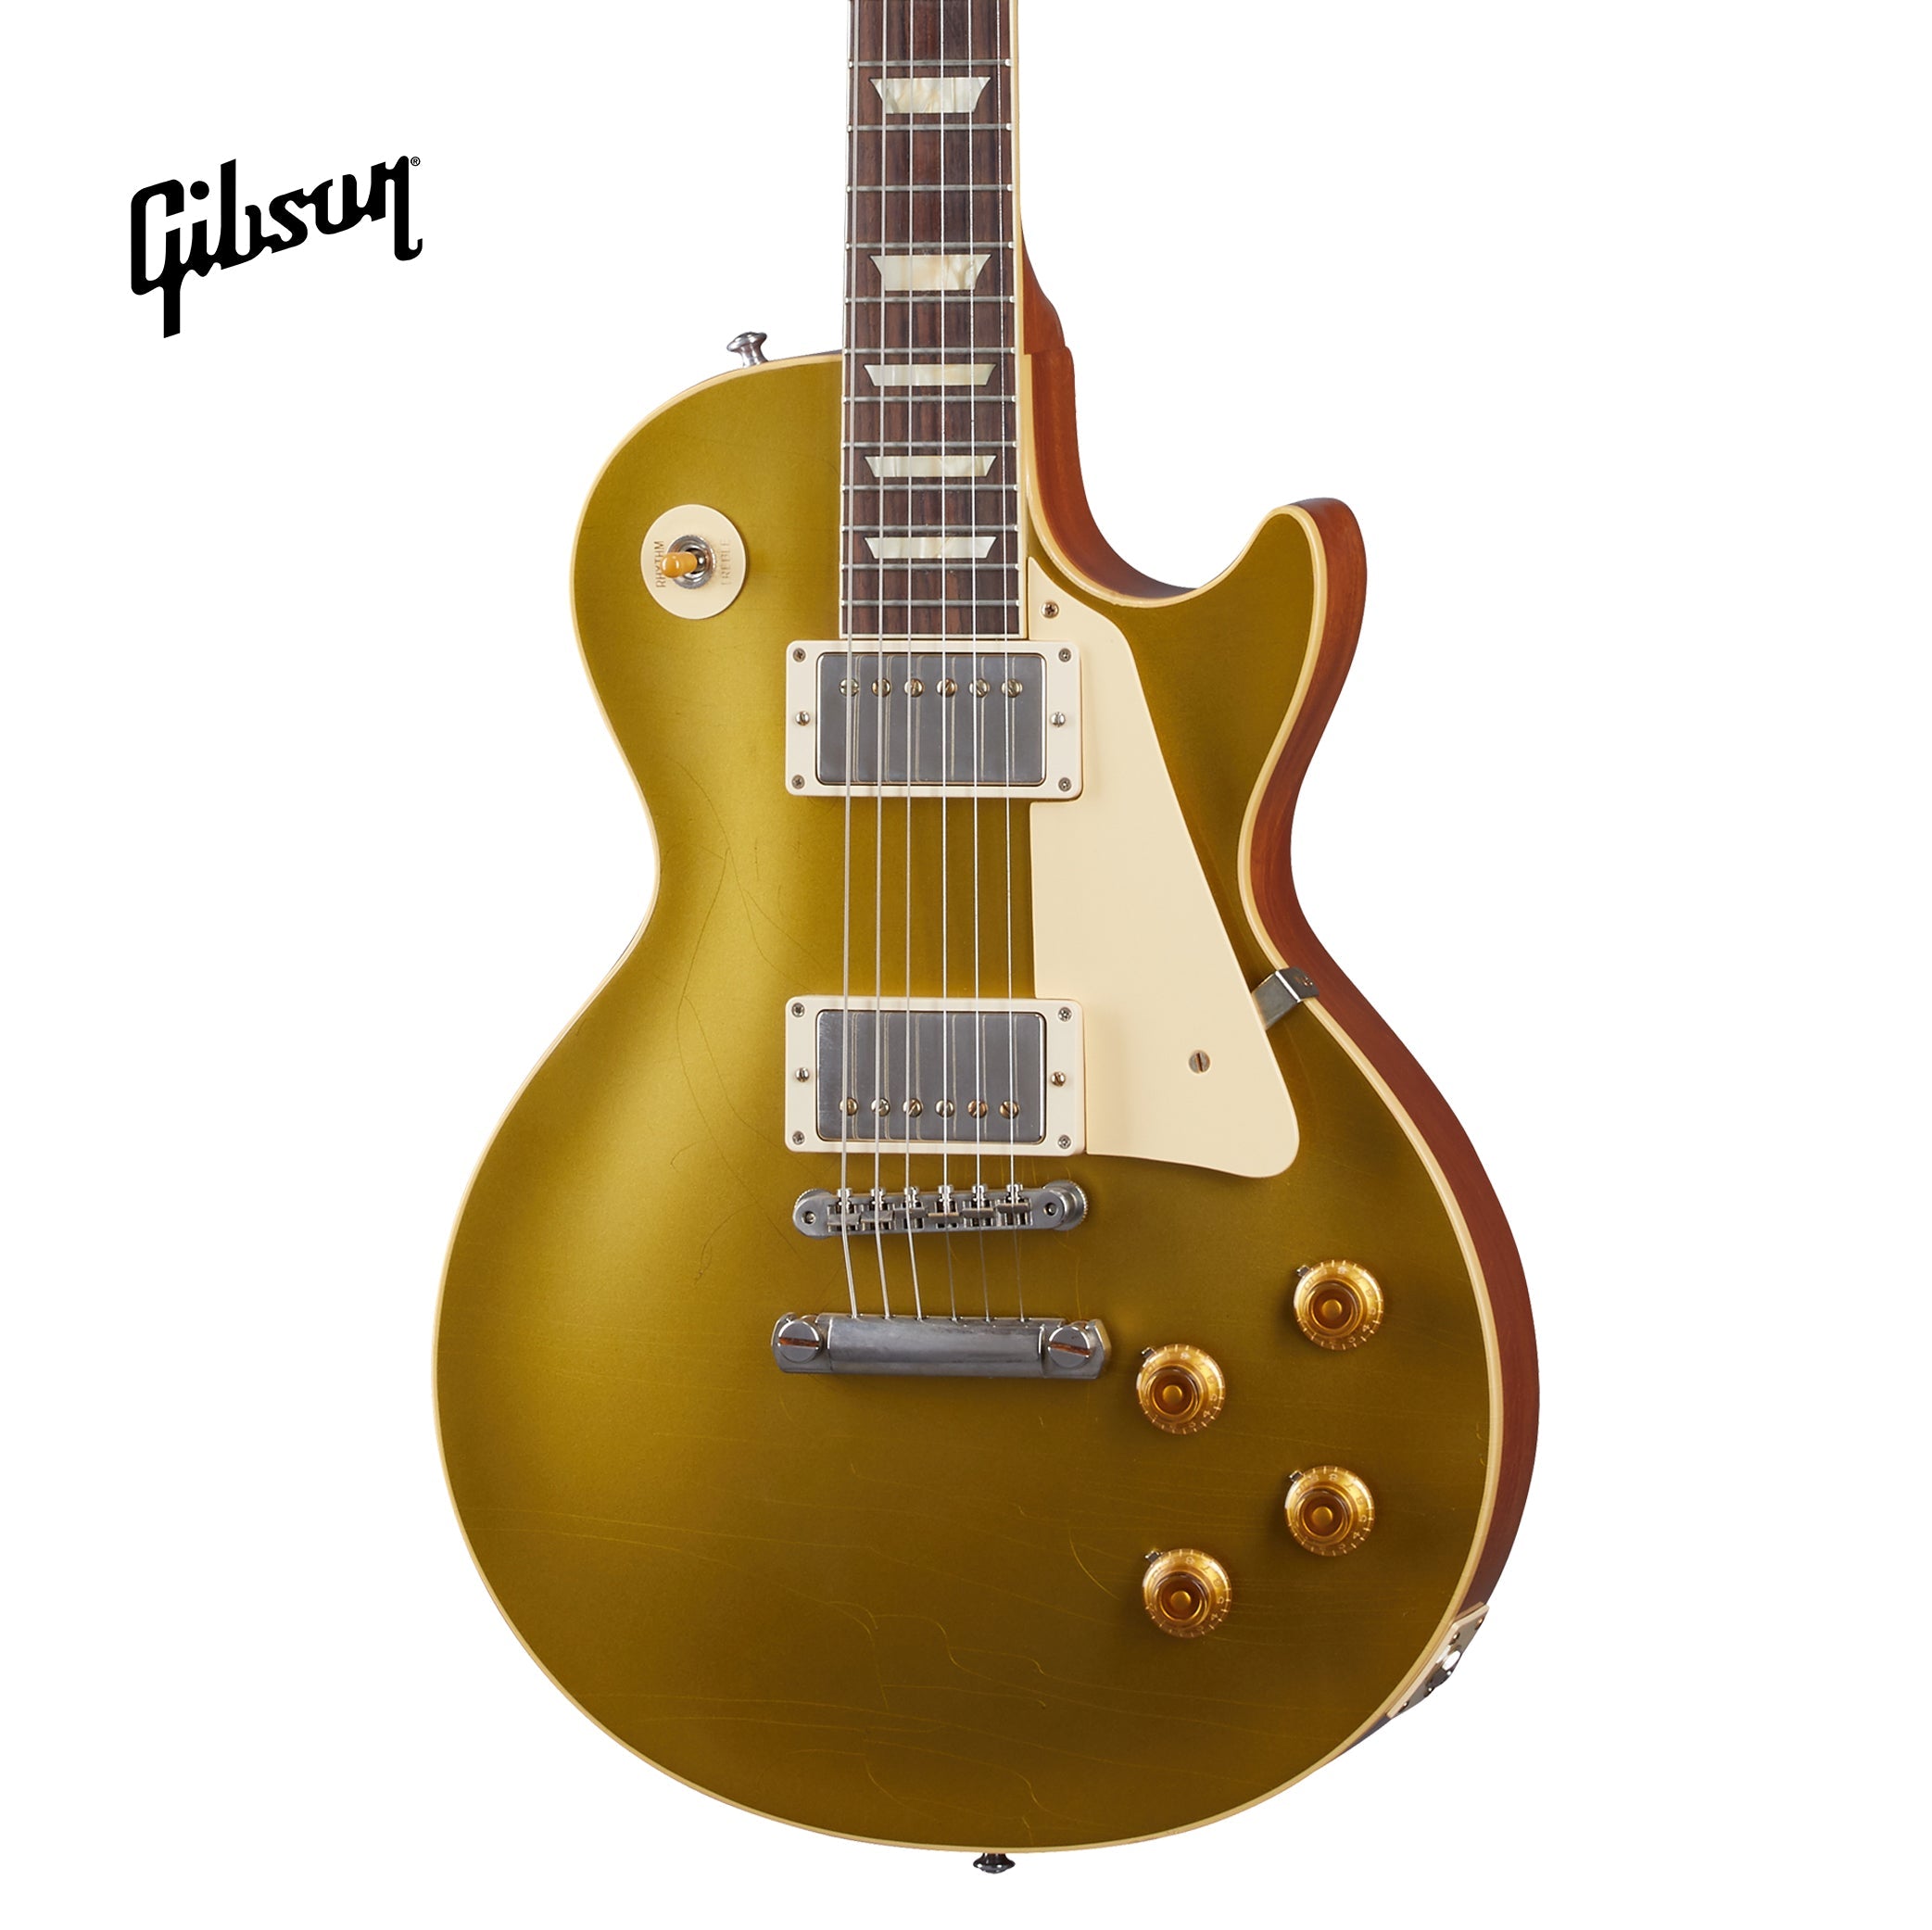 GIBSON 1957 LES PAUL GOLDTOP REISSUE ULTRA LIGHT AGED ELECTRIC GUITAR - DOUBLE GOLD